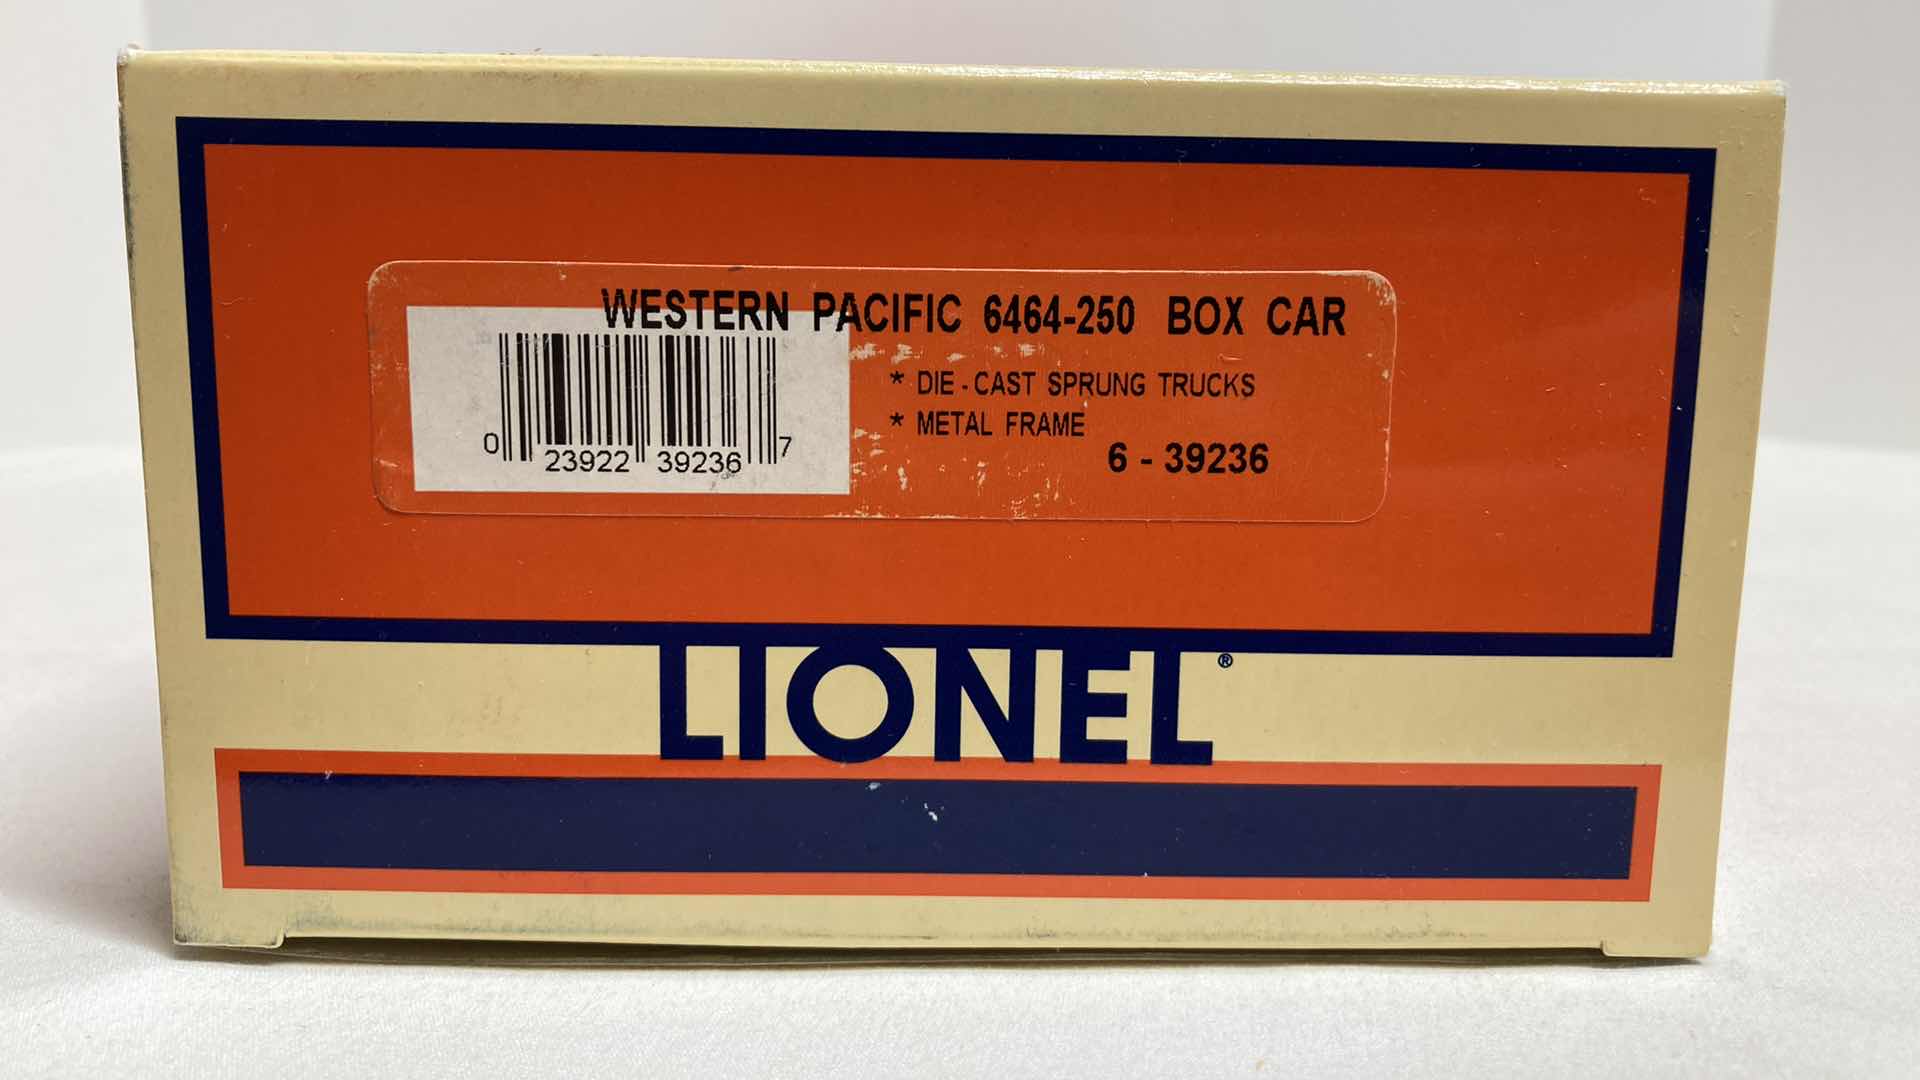 Photo 3 of WESTERN PACIFIC 6464-250 BOX CAR